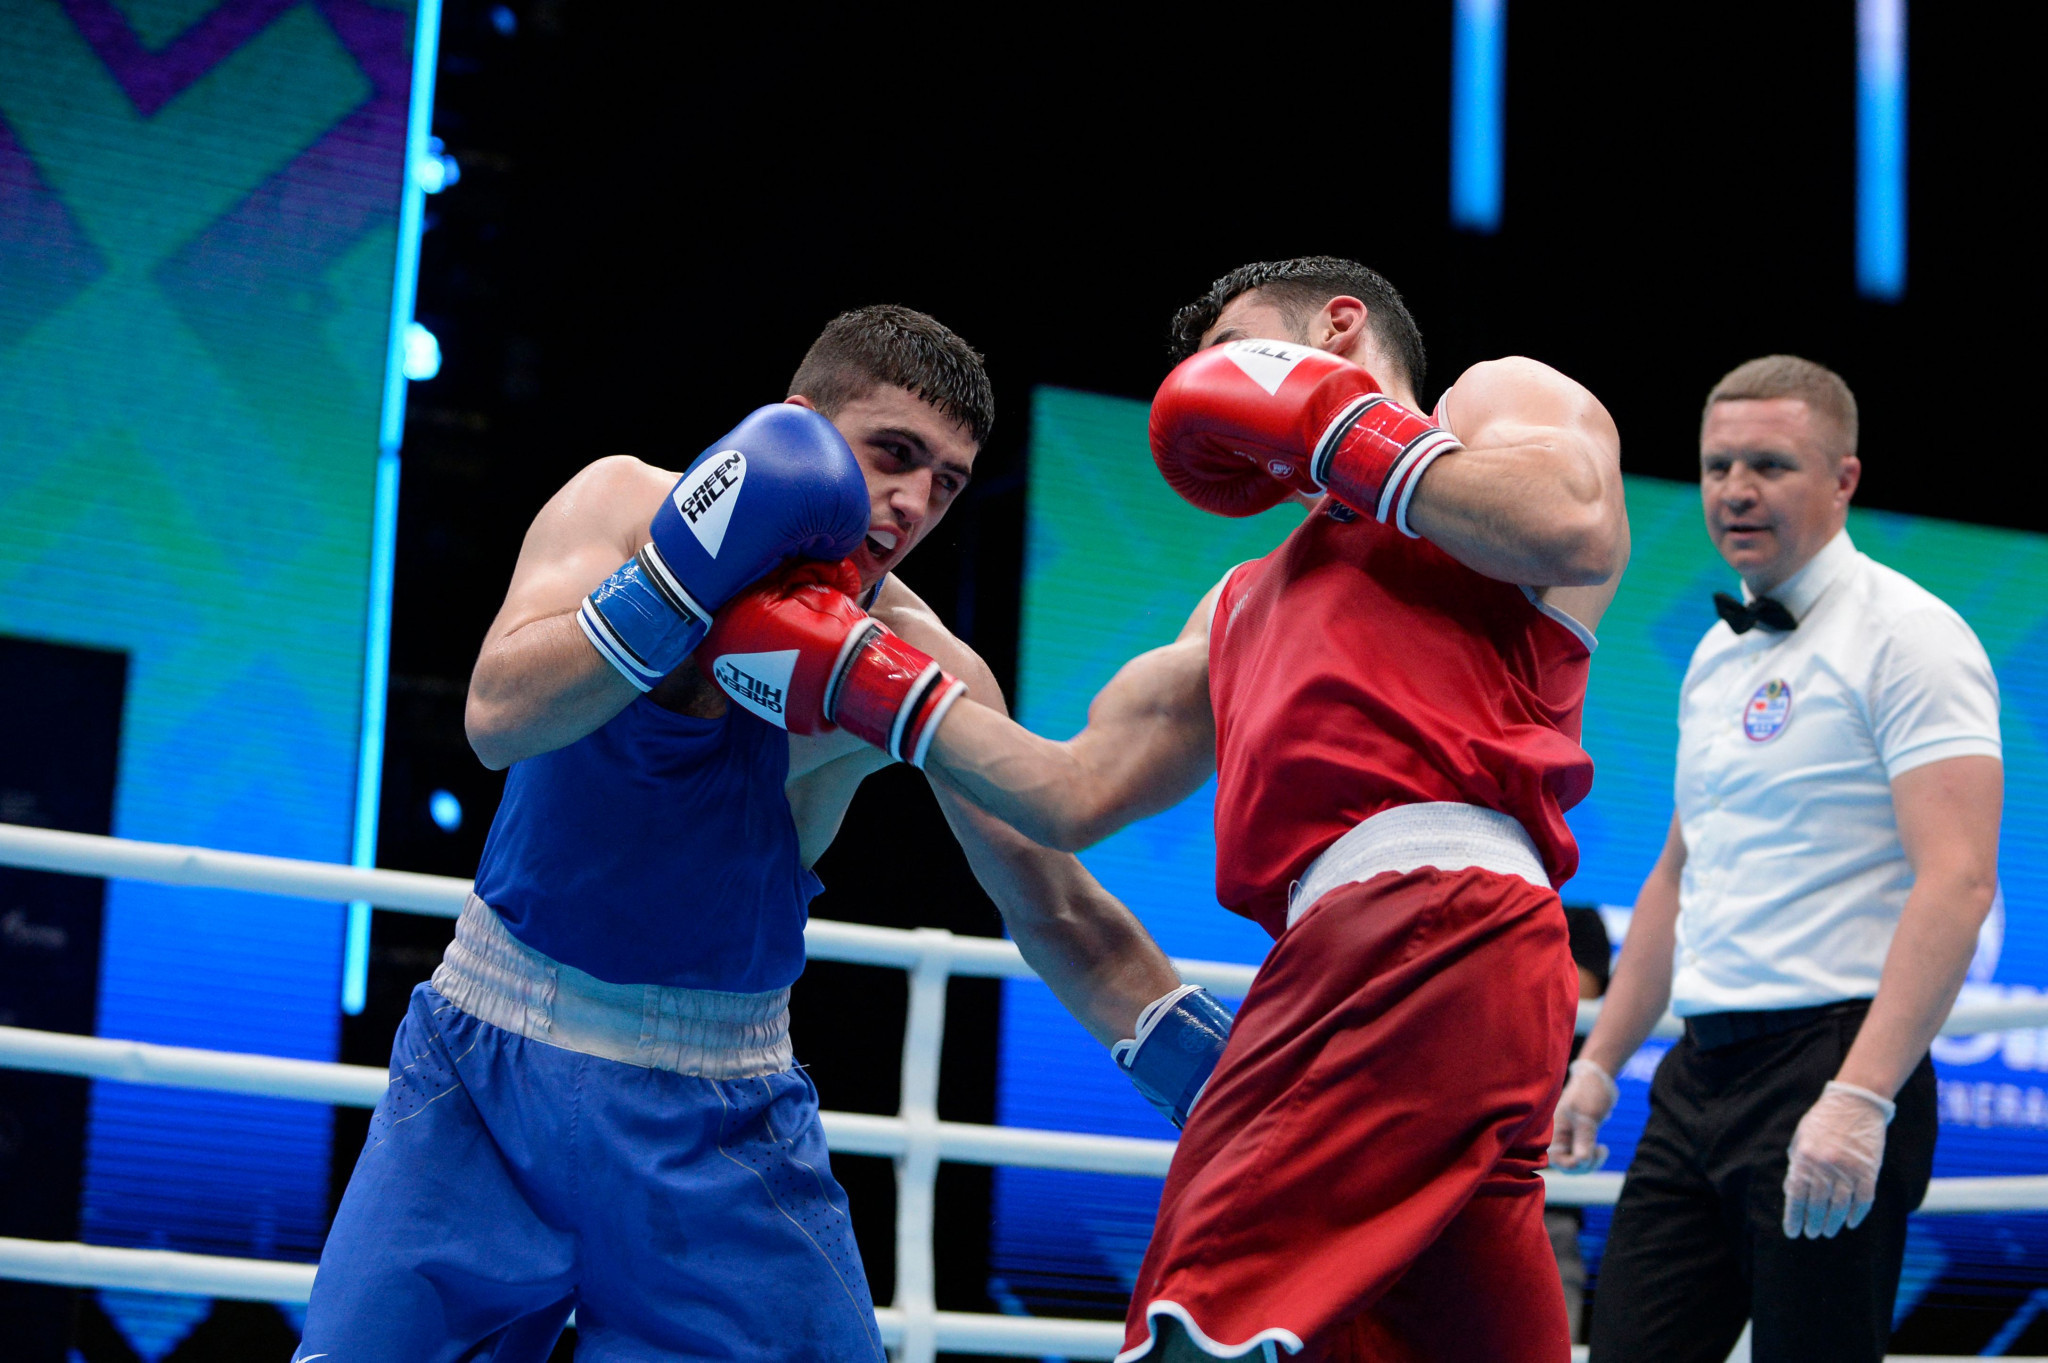  Van der Vorst also expressed concerns about the integrity of many IBA events in the past two years, including the 2022 Men’s Euopean Boxing Championships in Yerevan ©Getty Images